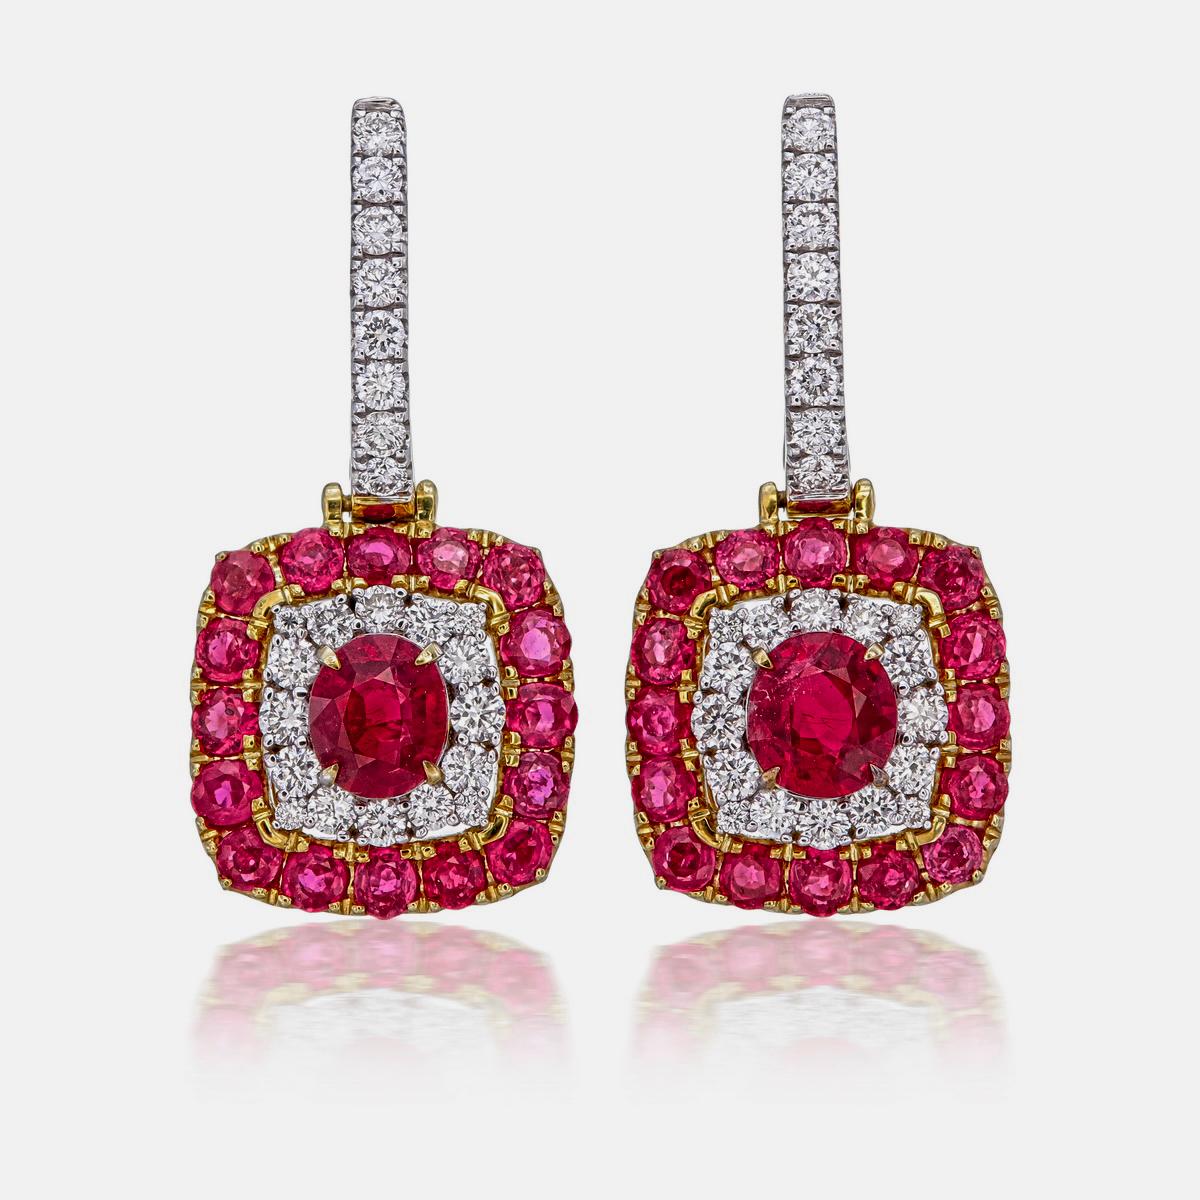 A pair of fine timeless ruby and diamond earrings made in 18 Karat gold. This pair of earrings embraces vintage with it's ruby embroidery along side the edge and it's boxy silhouette; a great fit for lifestyle wear and to semi-formal events.

-